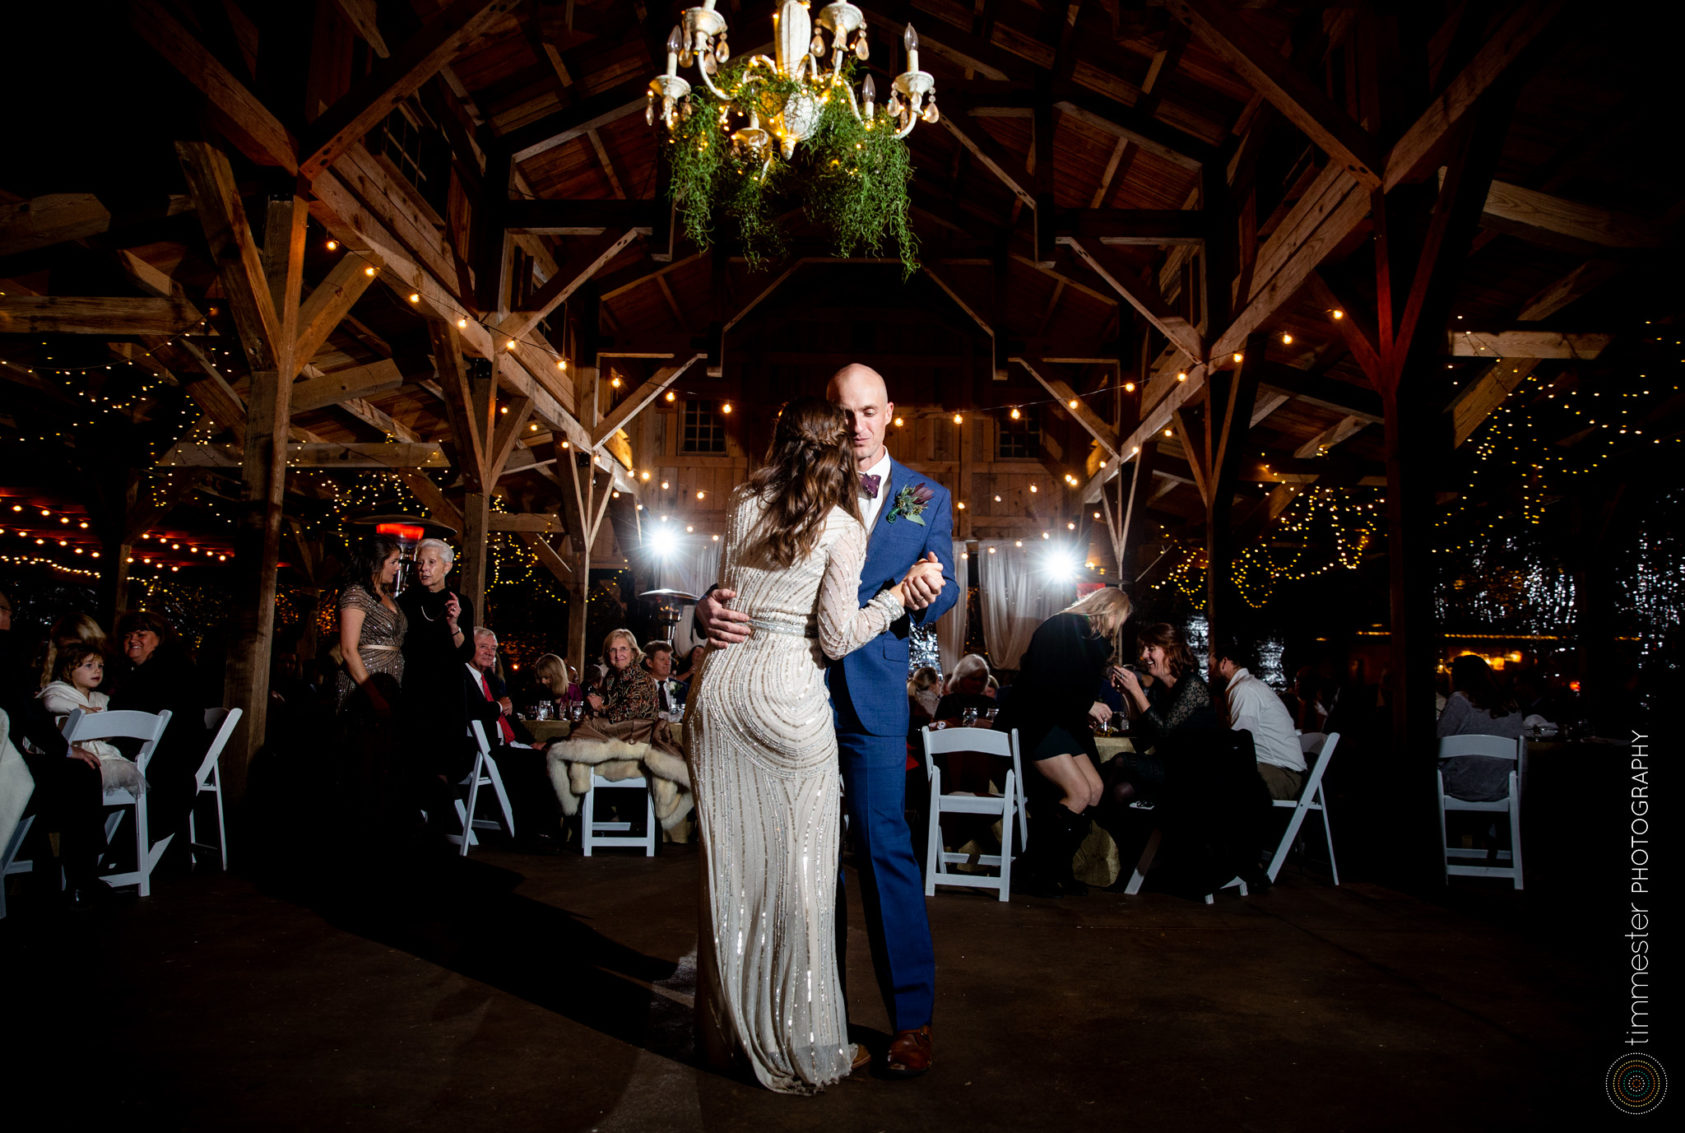 A December wedding and reception in North Carolina at Chapel Hill Carriage House